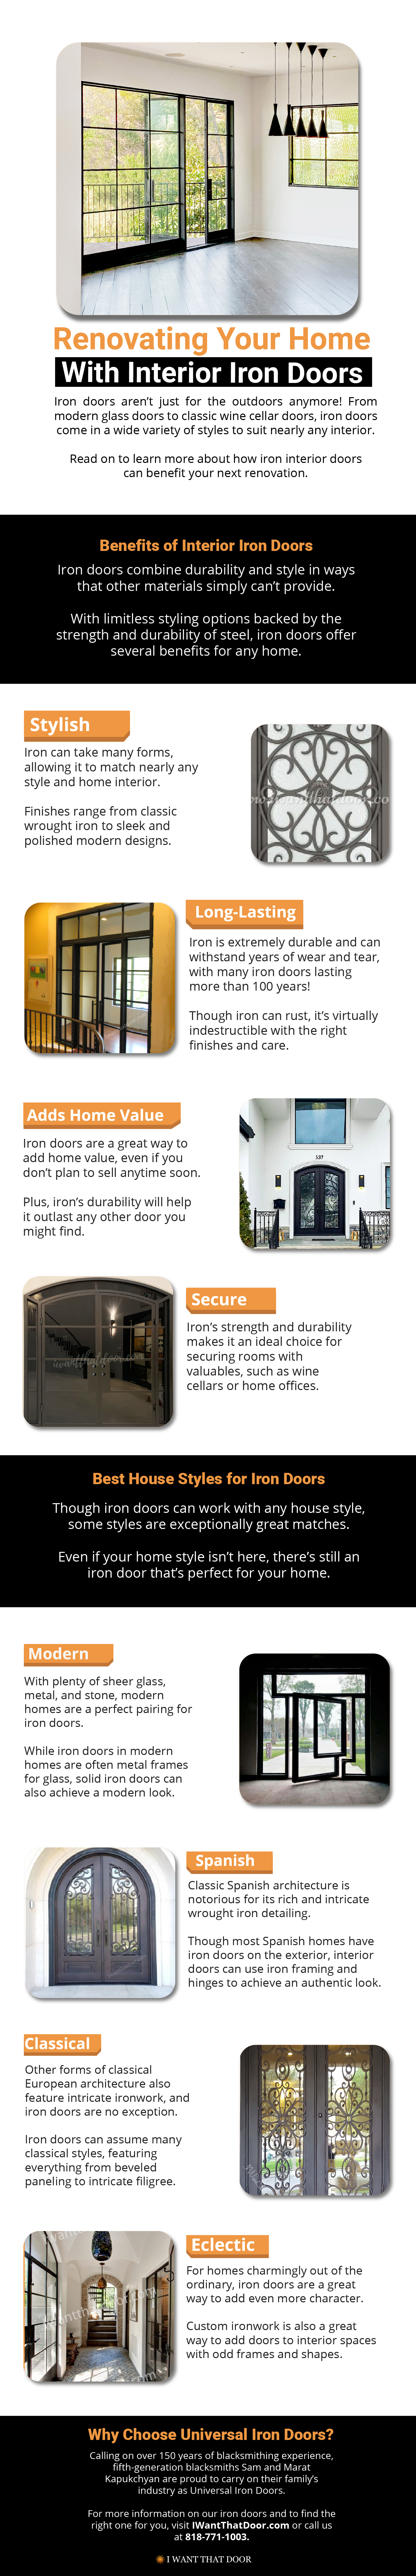 Renovating Your Home With Interior Iron Doors Infographic